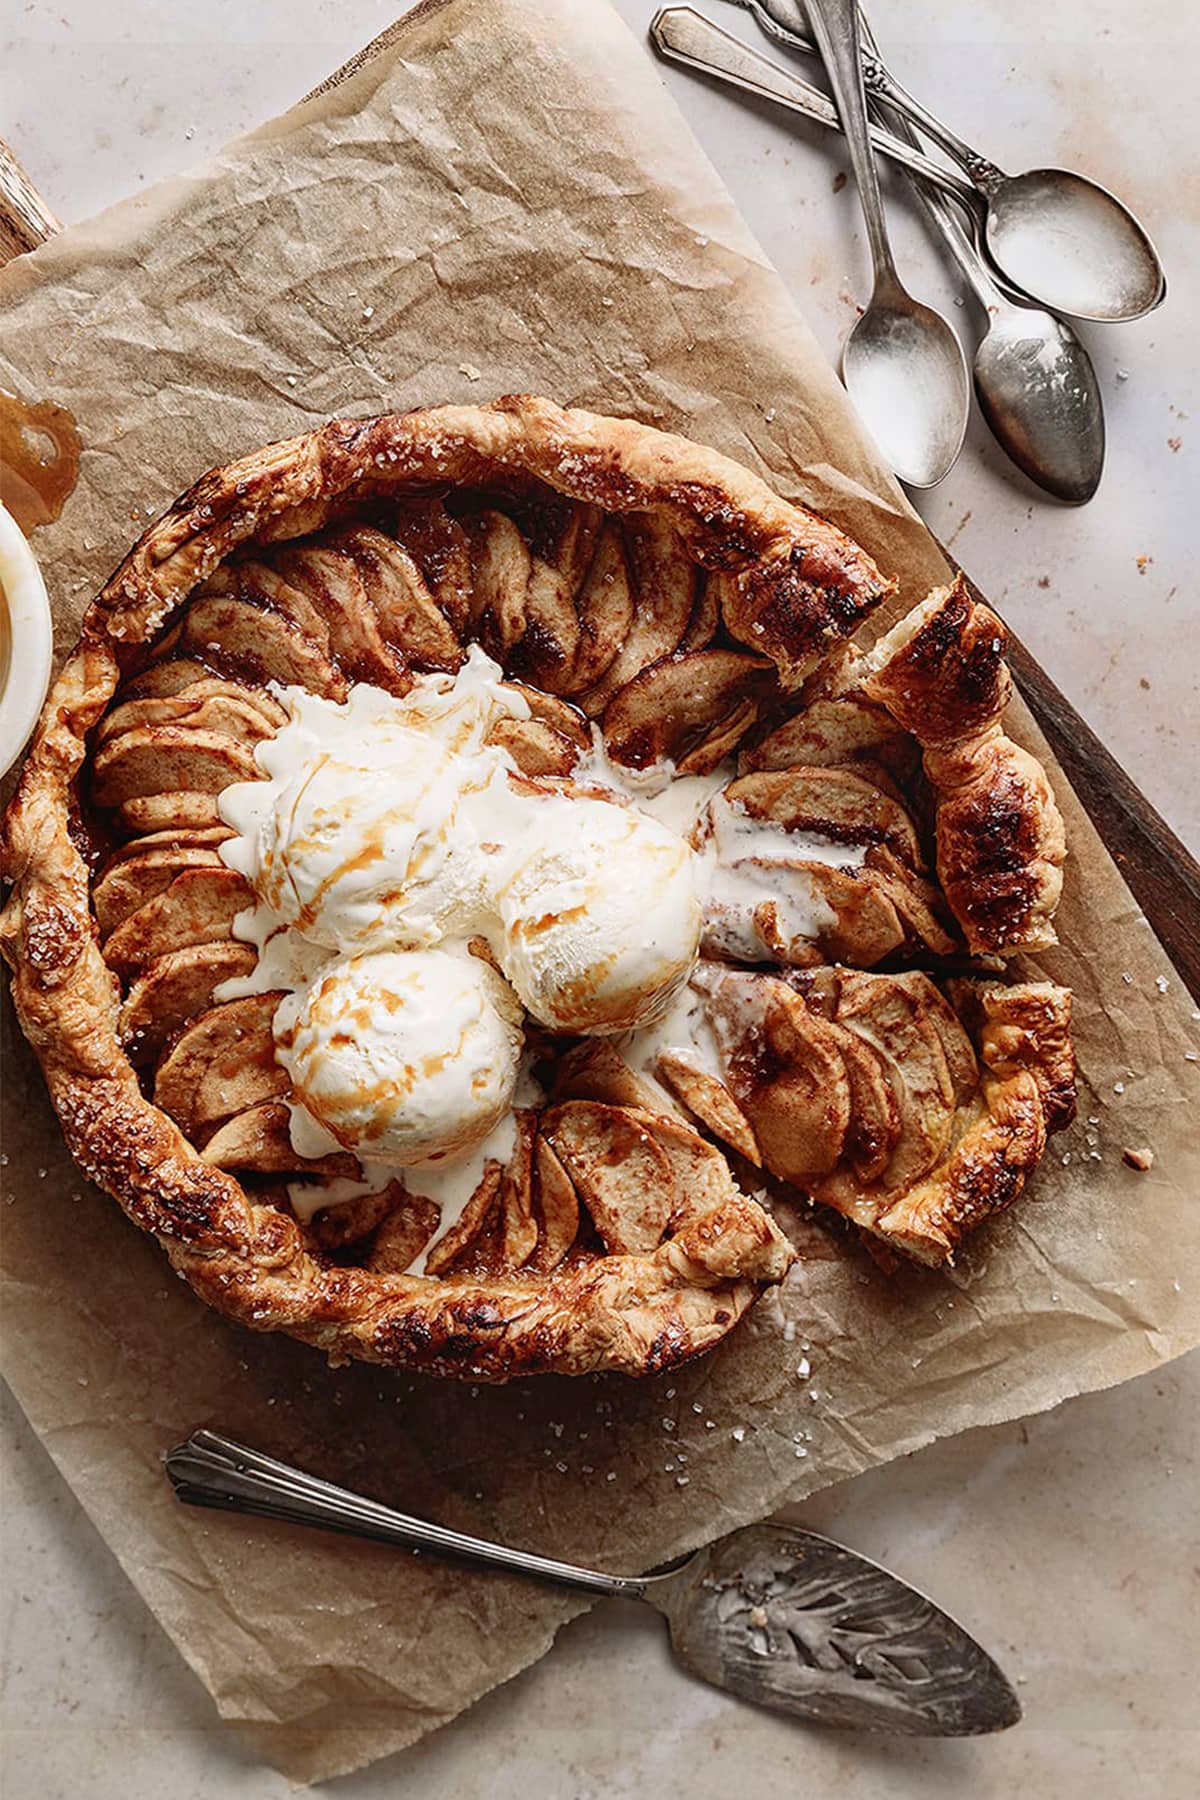 Apple galette with puff pastry, vanilla ice cream and caramel drizzle placed on a board with parchment paper and spoons